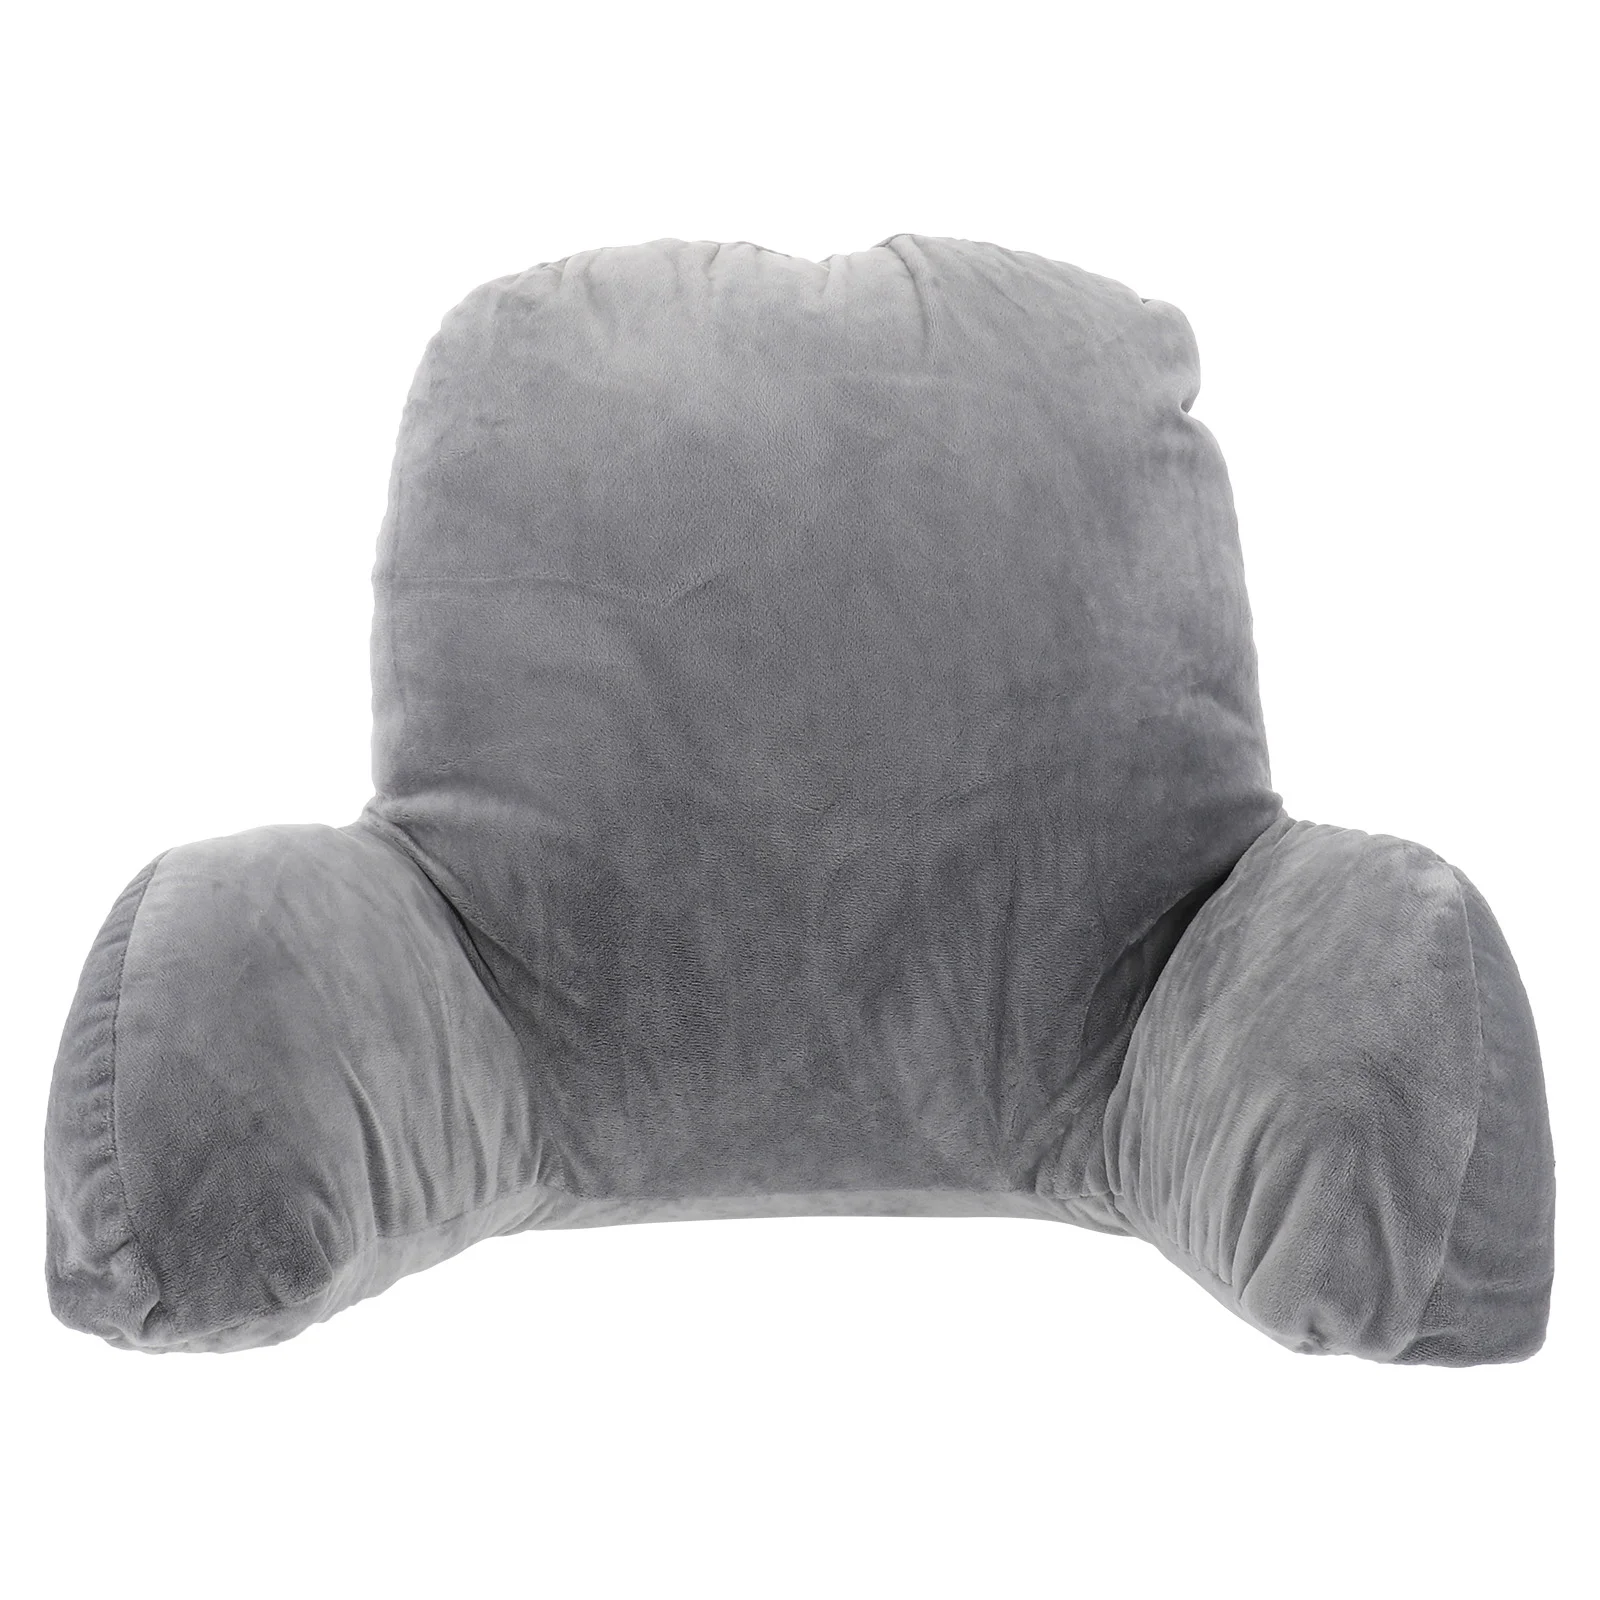 

Pillow Reading Backrest Bedcushionpillows Support Lumbar Wedge Sittingcouch Rest Lounger Cusion Outdoor Chairsit Cotton Book